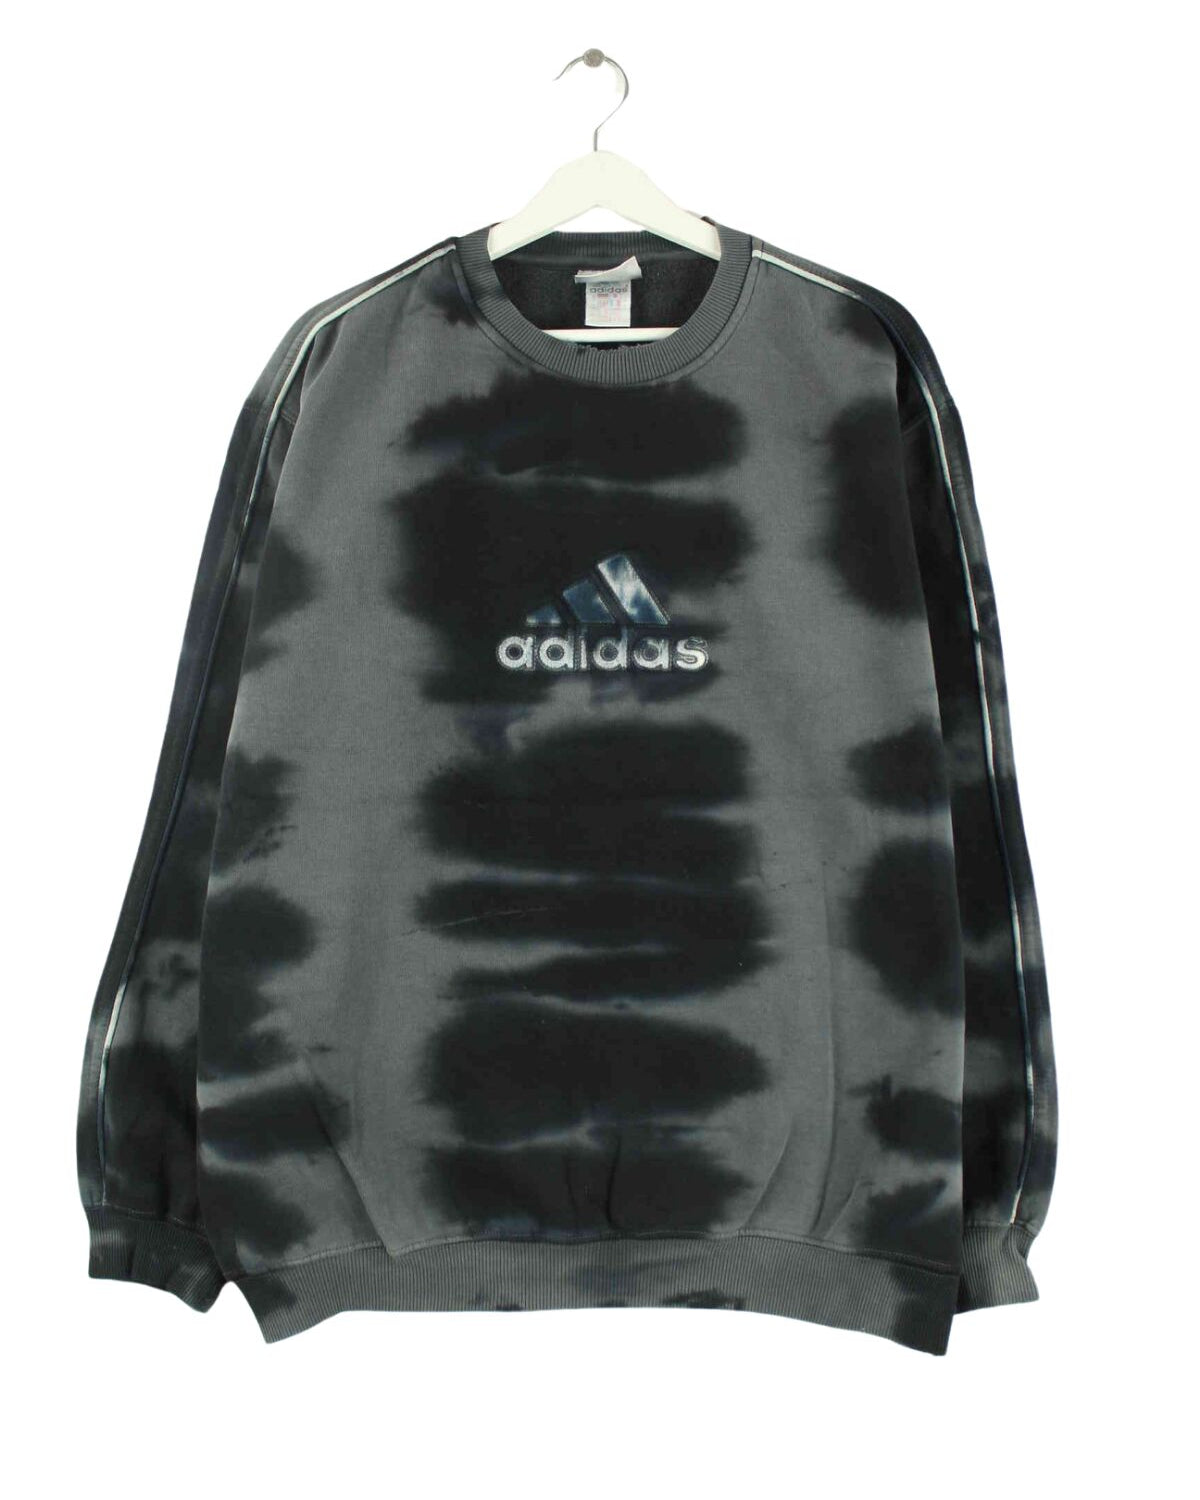 Adidas 90s Vintage Big Logo Embroidered Tie Dye Sweater Grau M (front image)